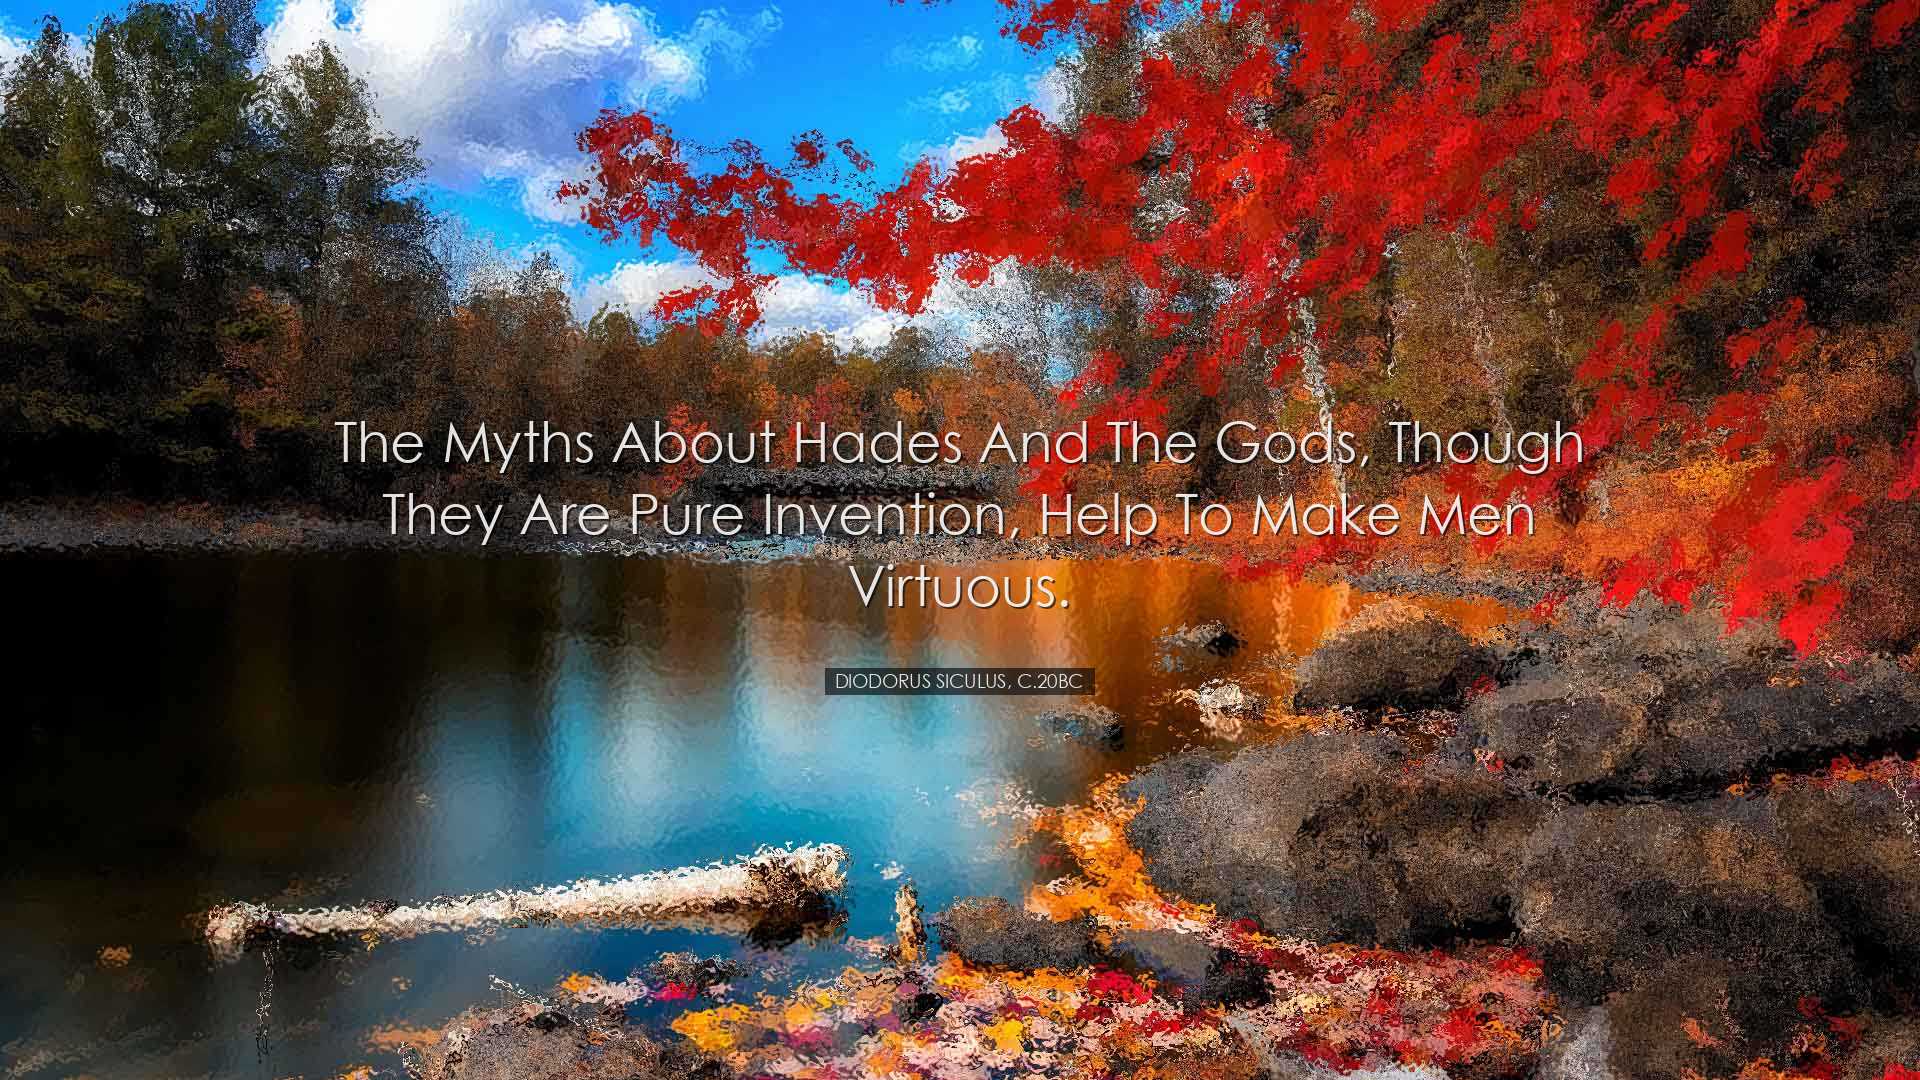 The myths about Hades and the gods, though they are pure invention